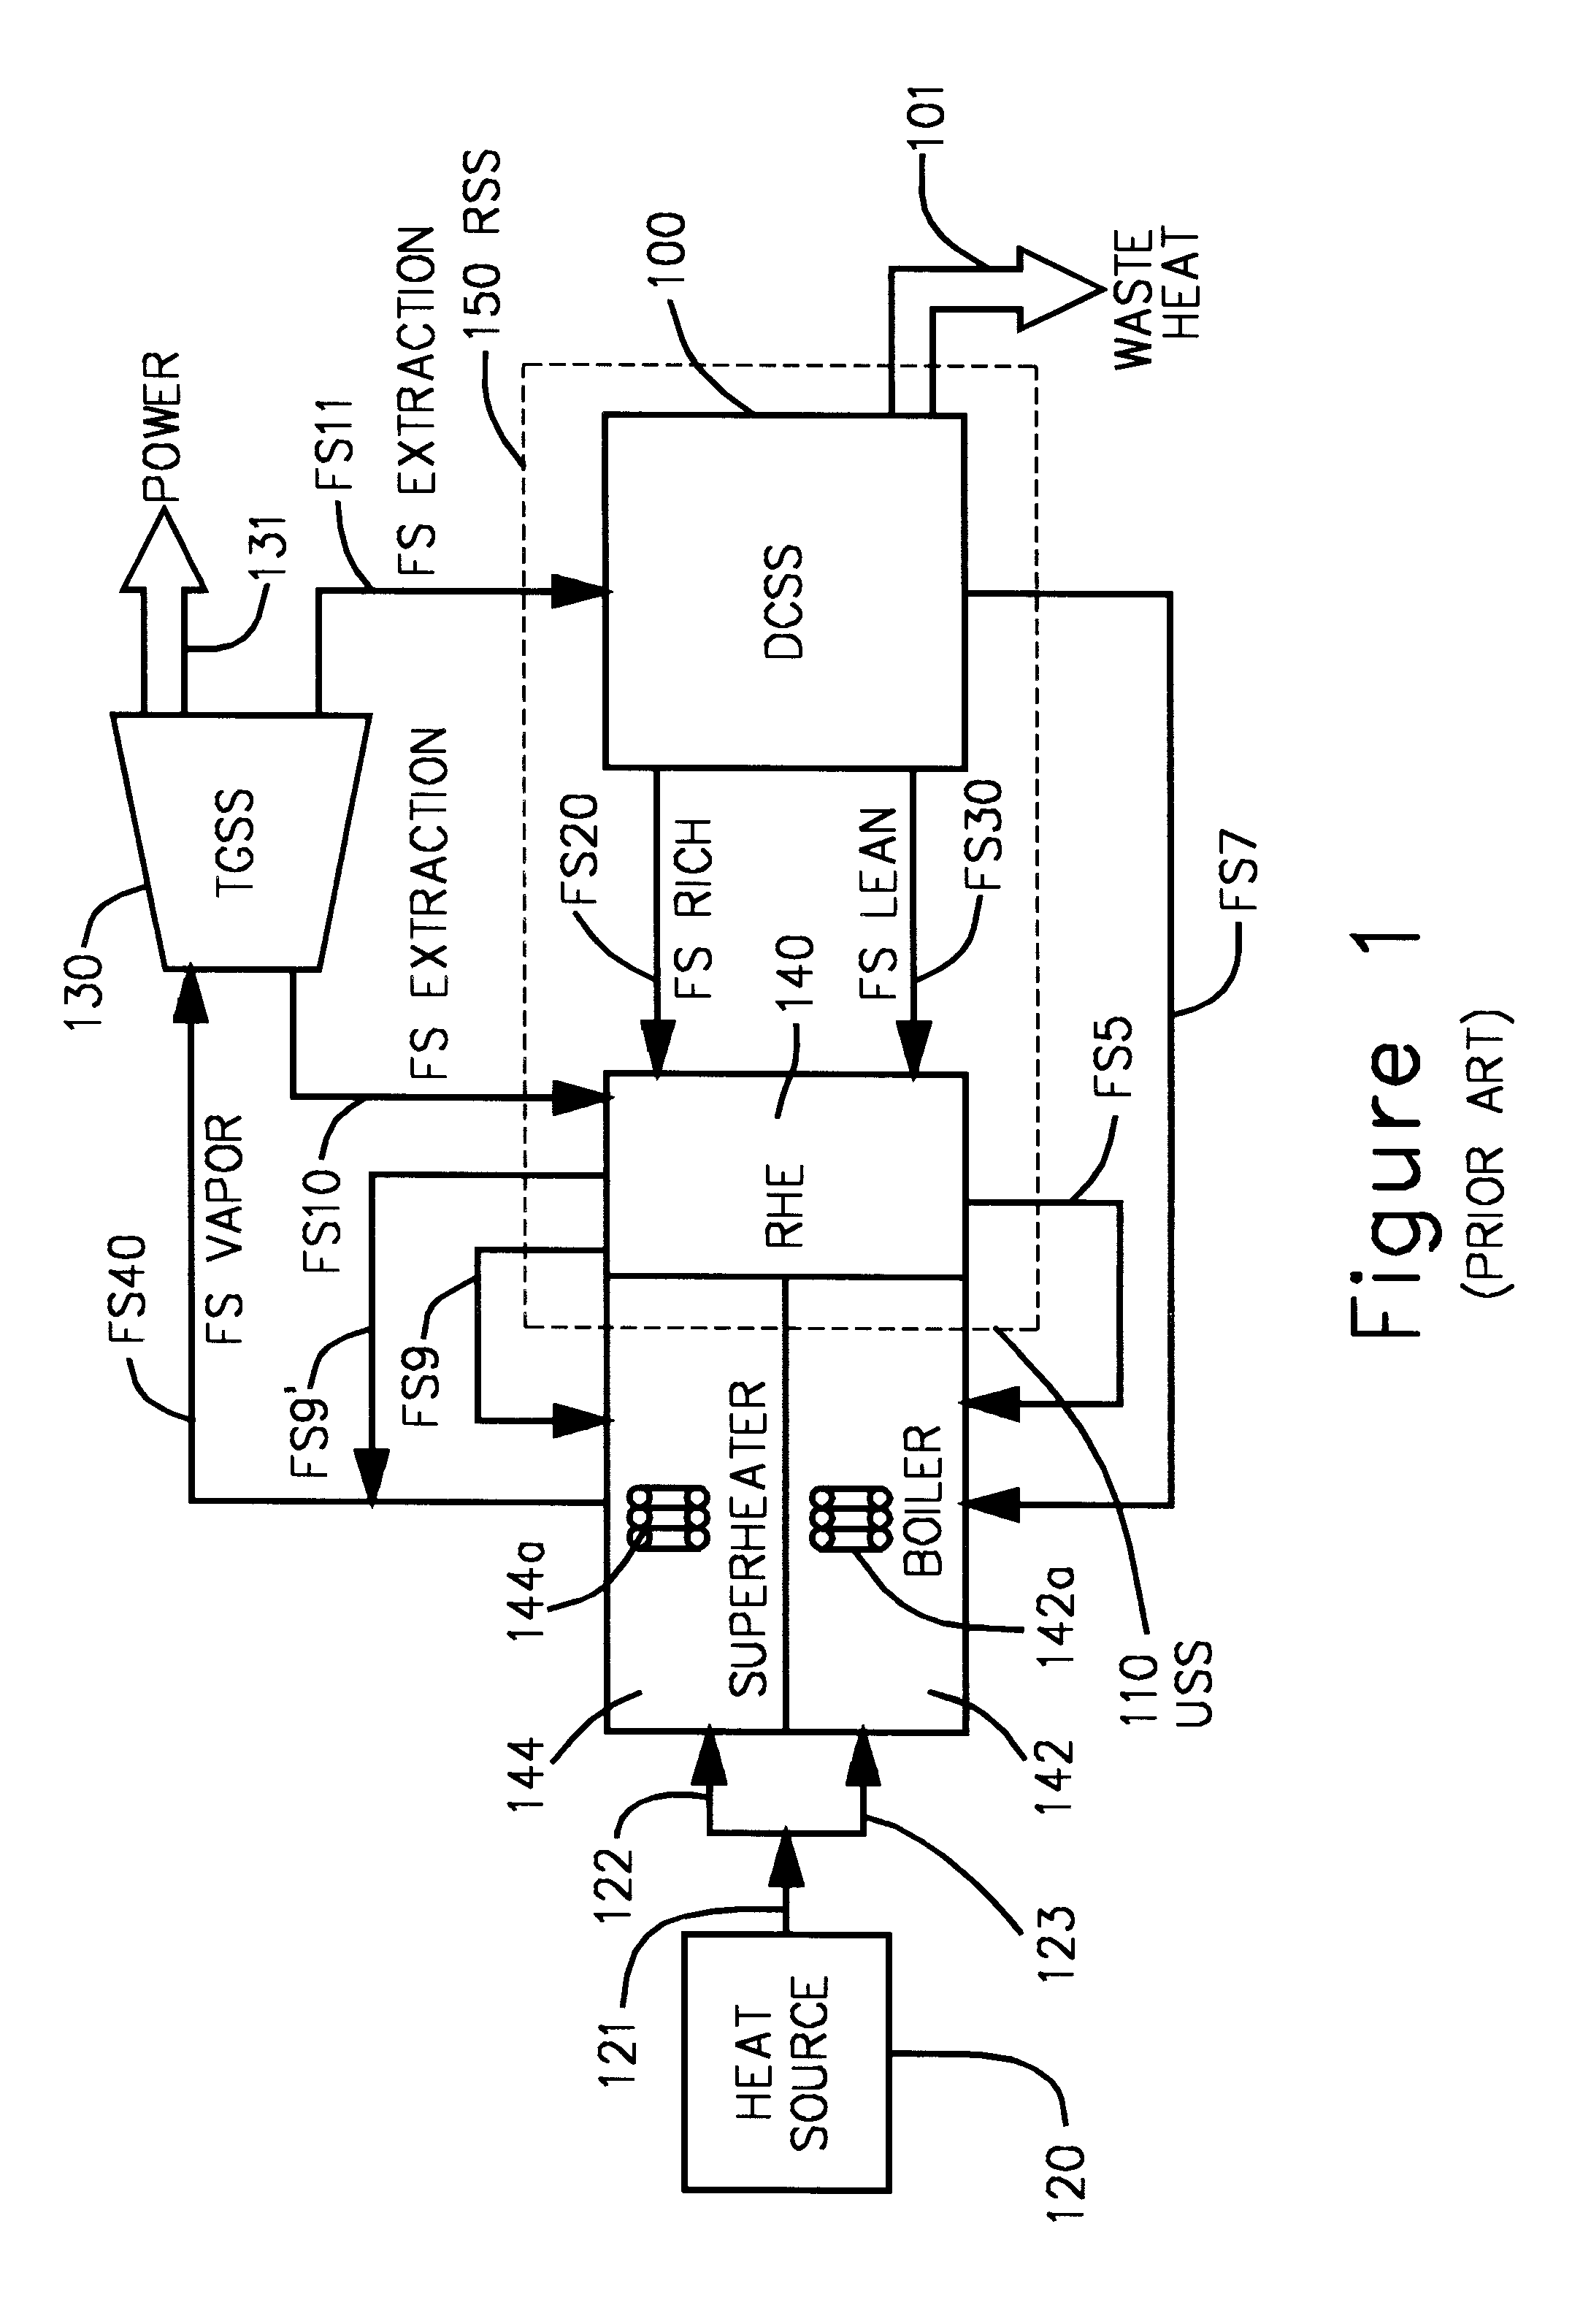 Regenerative subsystem control in a kalina cycle power generation system